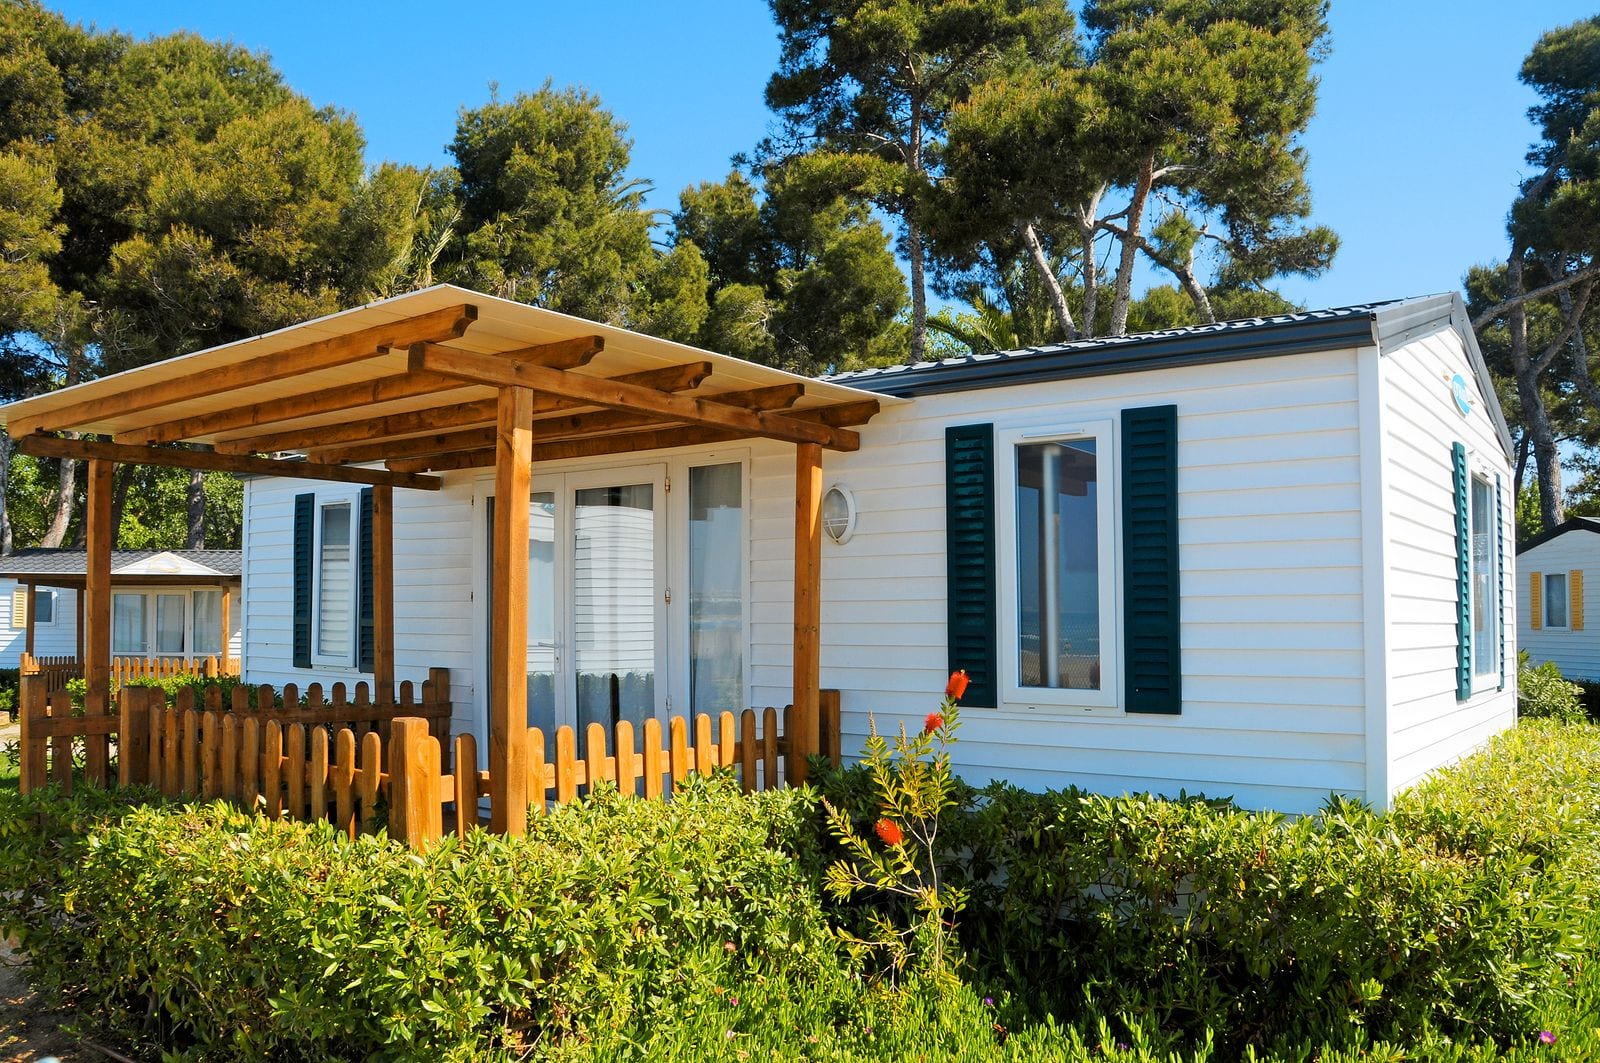 Is Mobile Home A Good Investment?